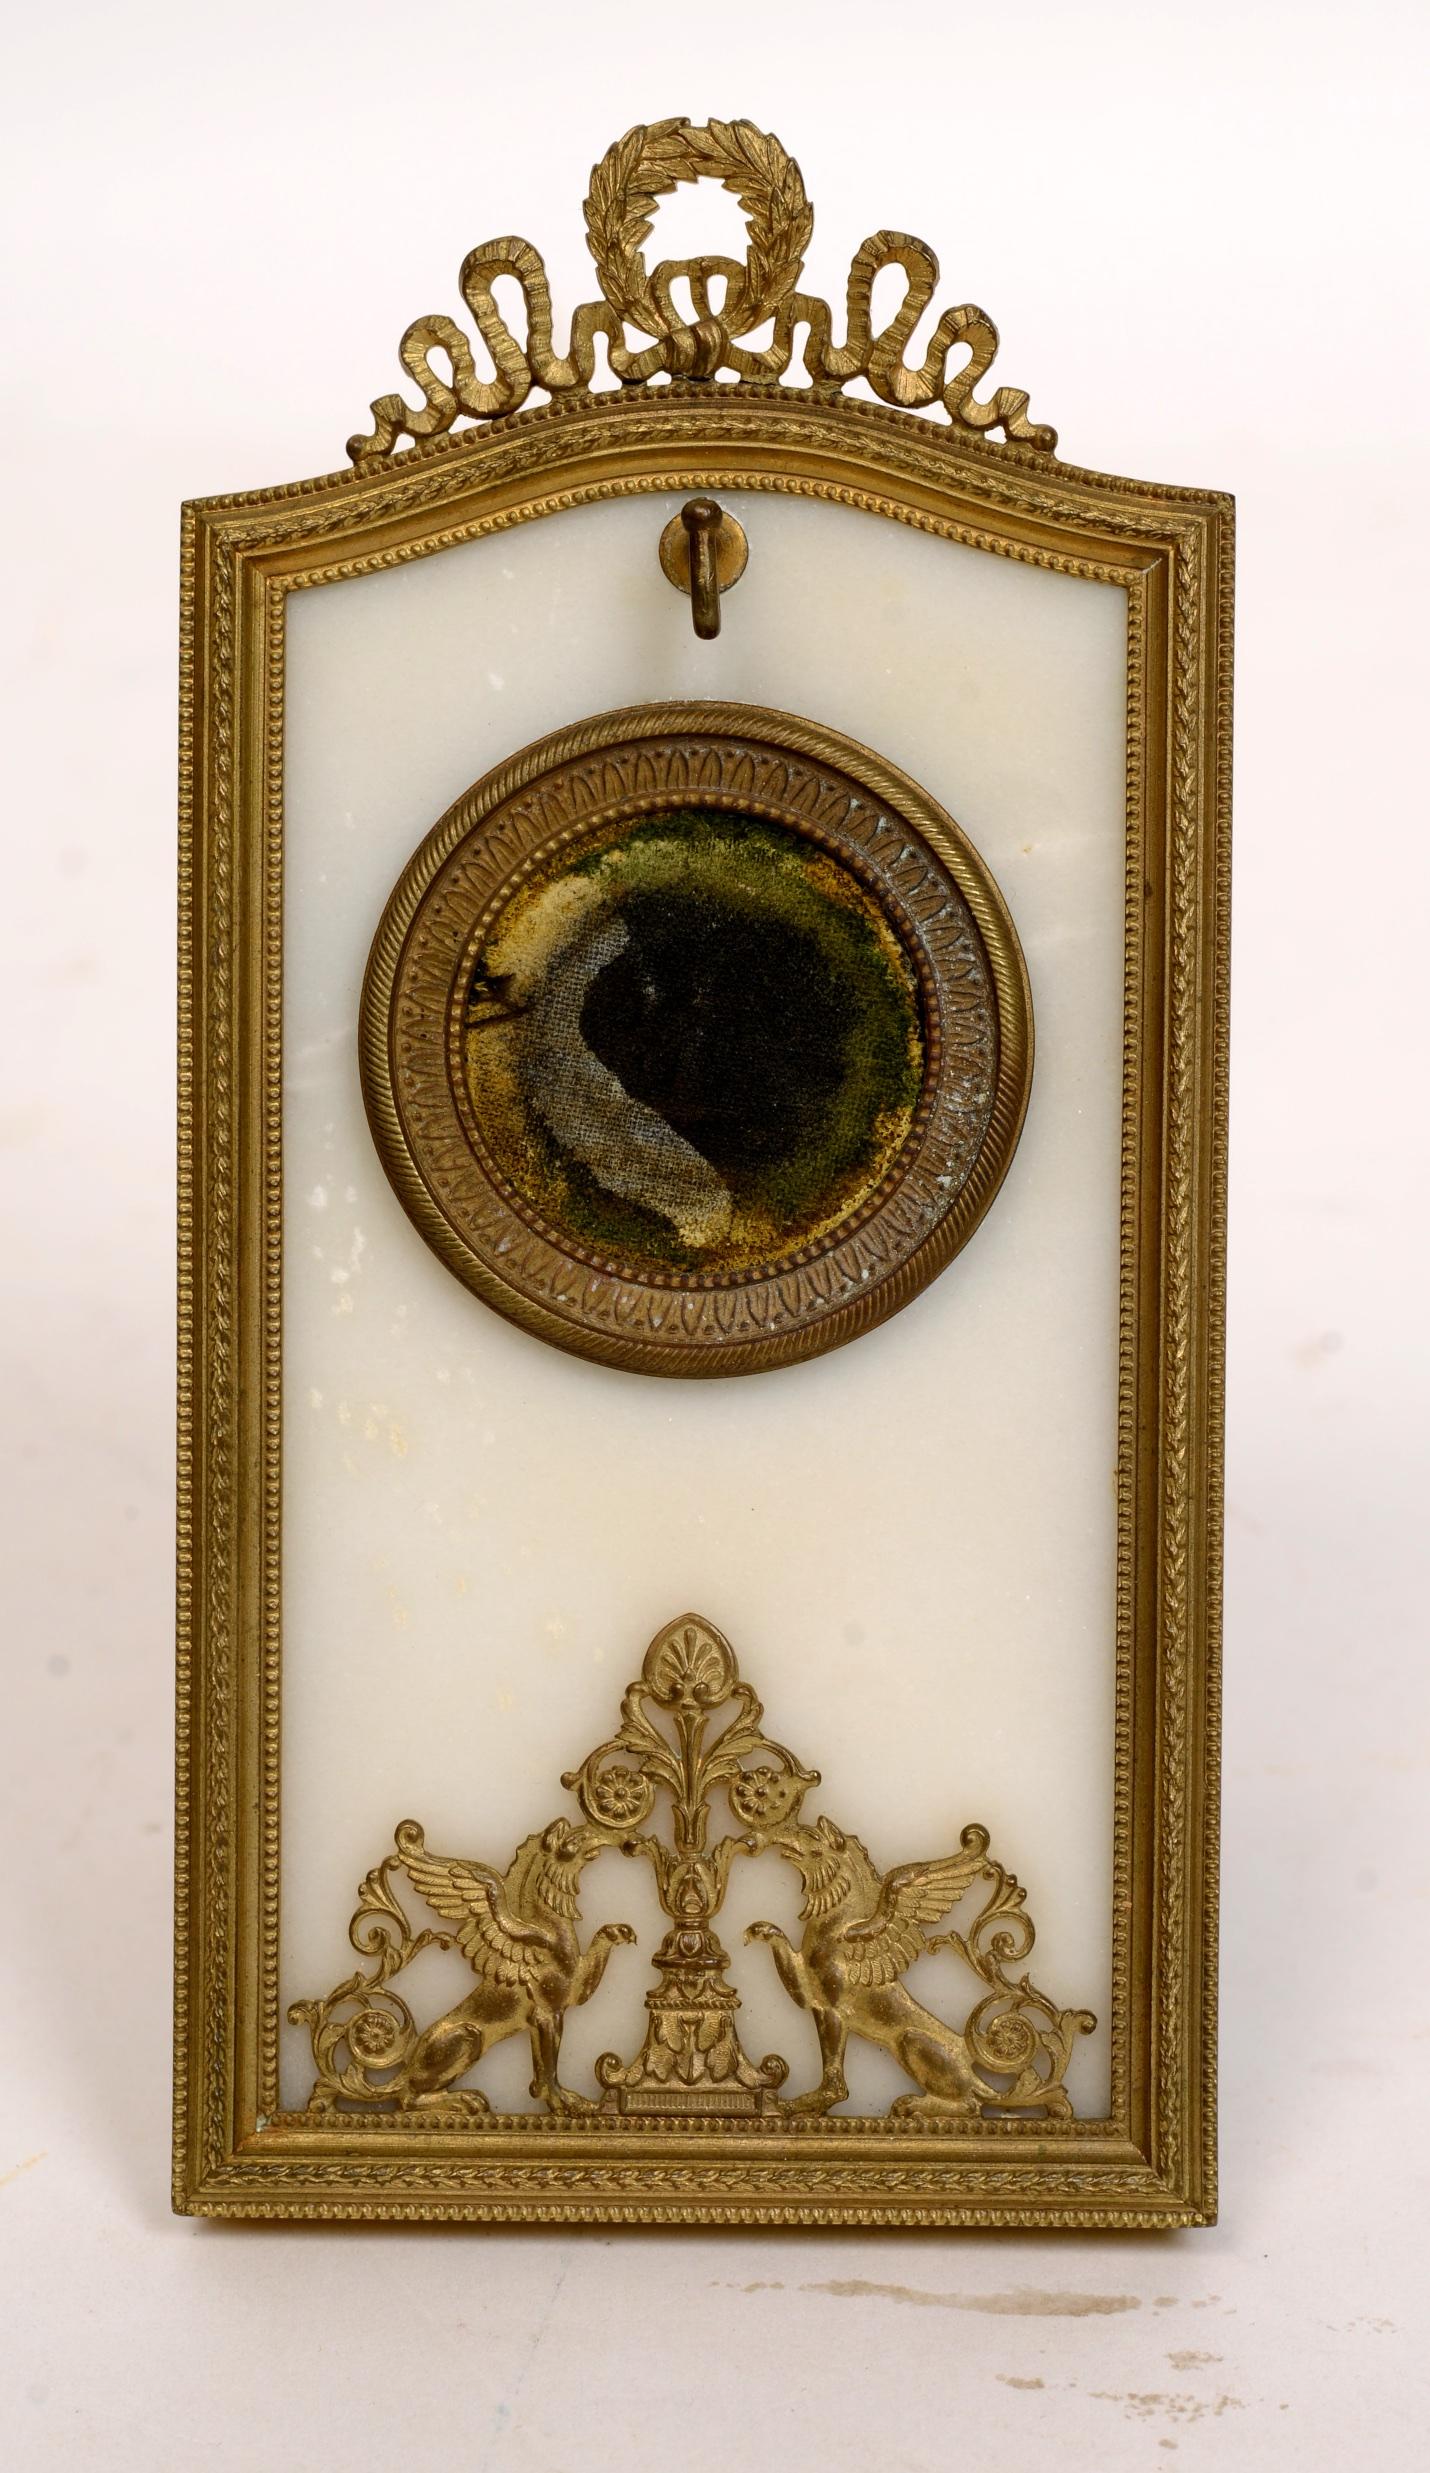 French Empire period watch holder, circa 1800. Marble and gilt bronze, with gilt bronze griffons, topped with gilt bronze laurel leaf and ribbon. The watch is supported and hangs in a gilt bronze surrounded circle. Griffons were a legendary creature